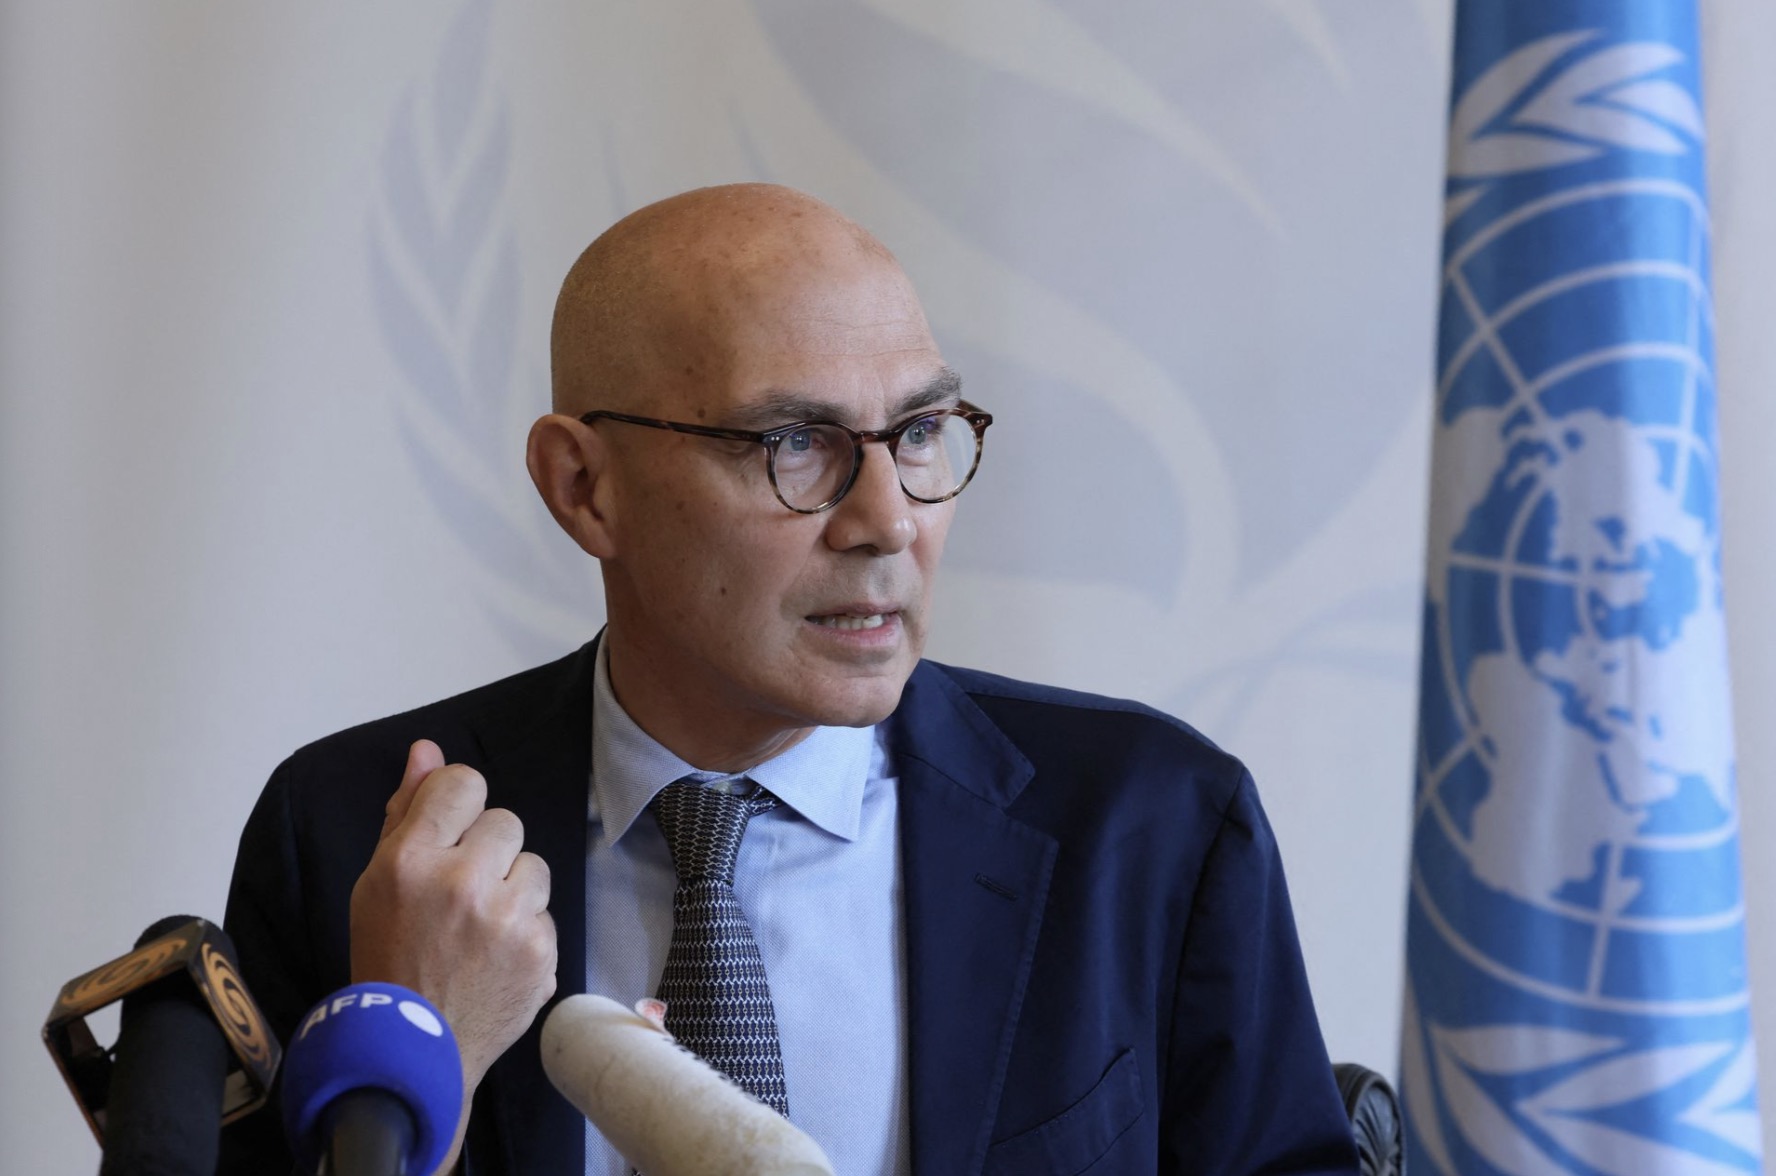 New United Nations High Commissioner for Human Rights (UNHCR) Volker Turk gives a statement during a news conference at Palais Wilson in Geneva, Switzerland November 2, 2022. /Reuters